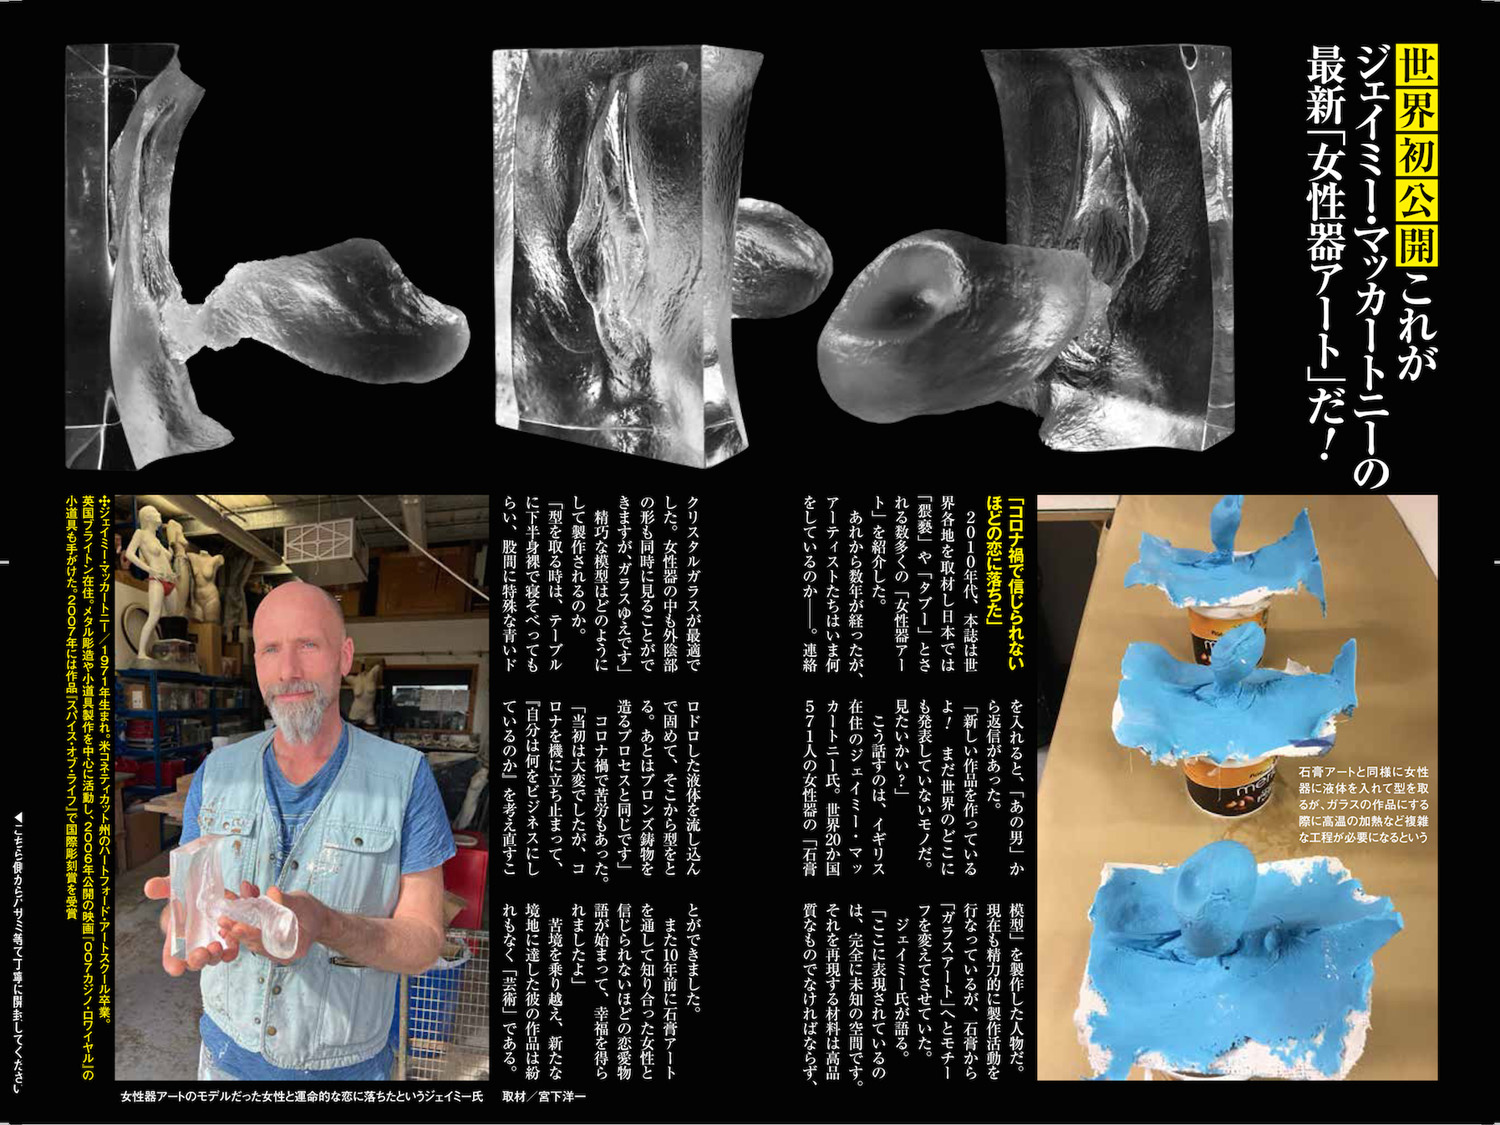 Shogakukan Weekly Post cover featuring Jamie McCartney's internal vagina casts in glass